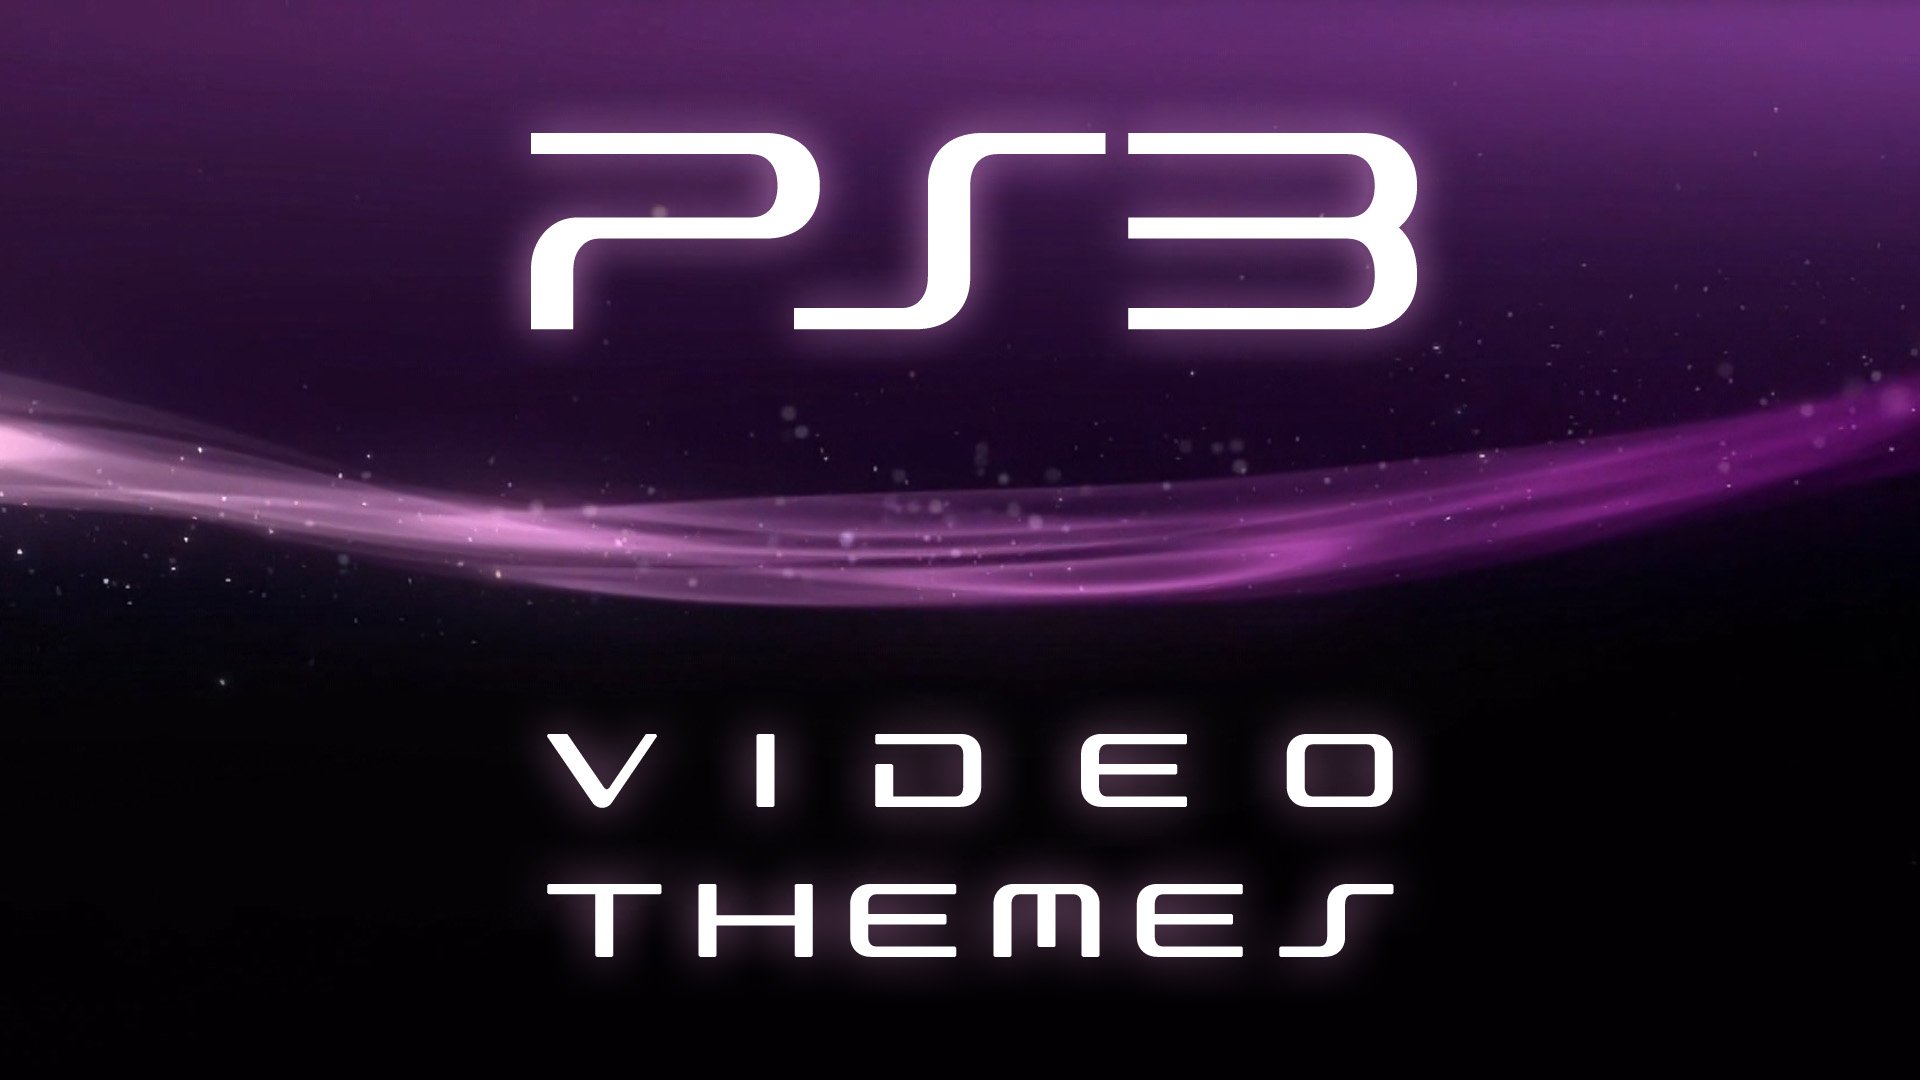 More information about "Theme Videos and Video Snaps for Sony Playstation 3"